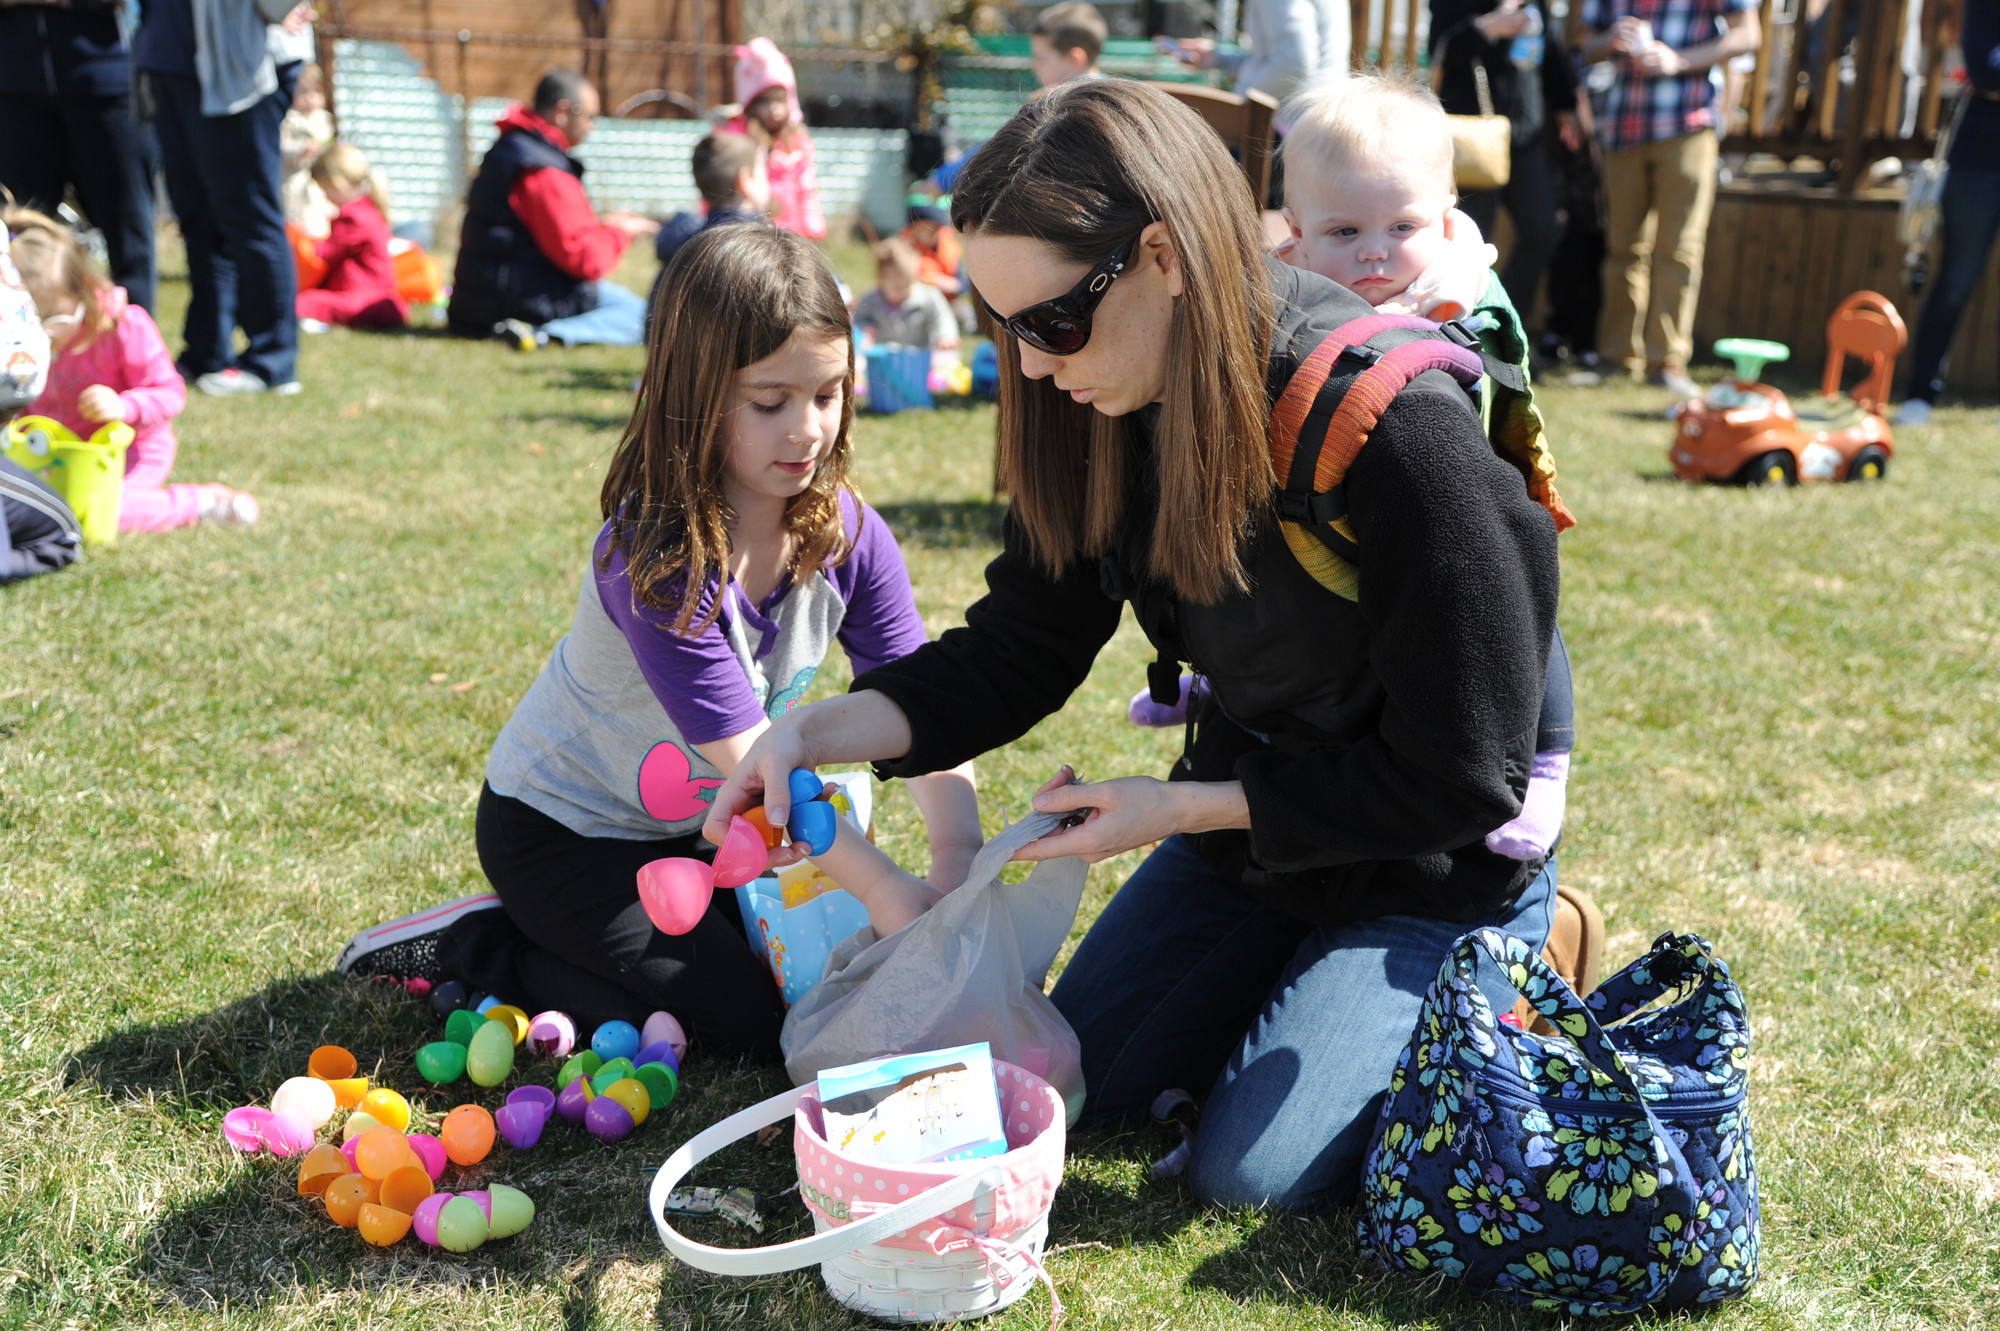 Colleen Morgan, with 10-month-old Julianna strapped to her back, helped Hayley Schwint, 7, sort through her bag of eggs.